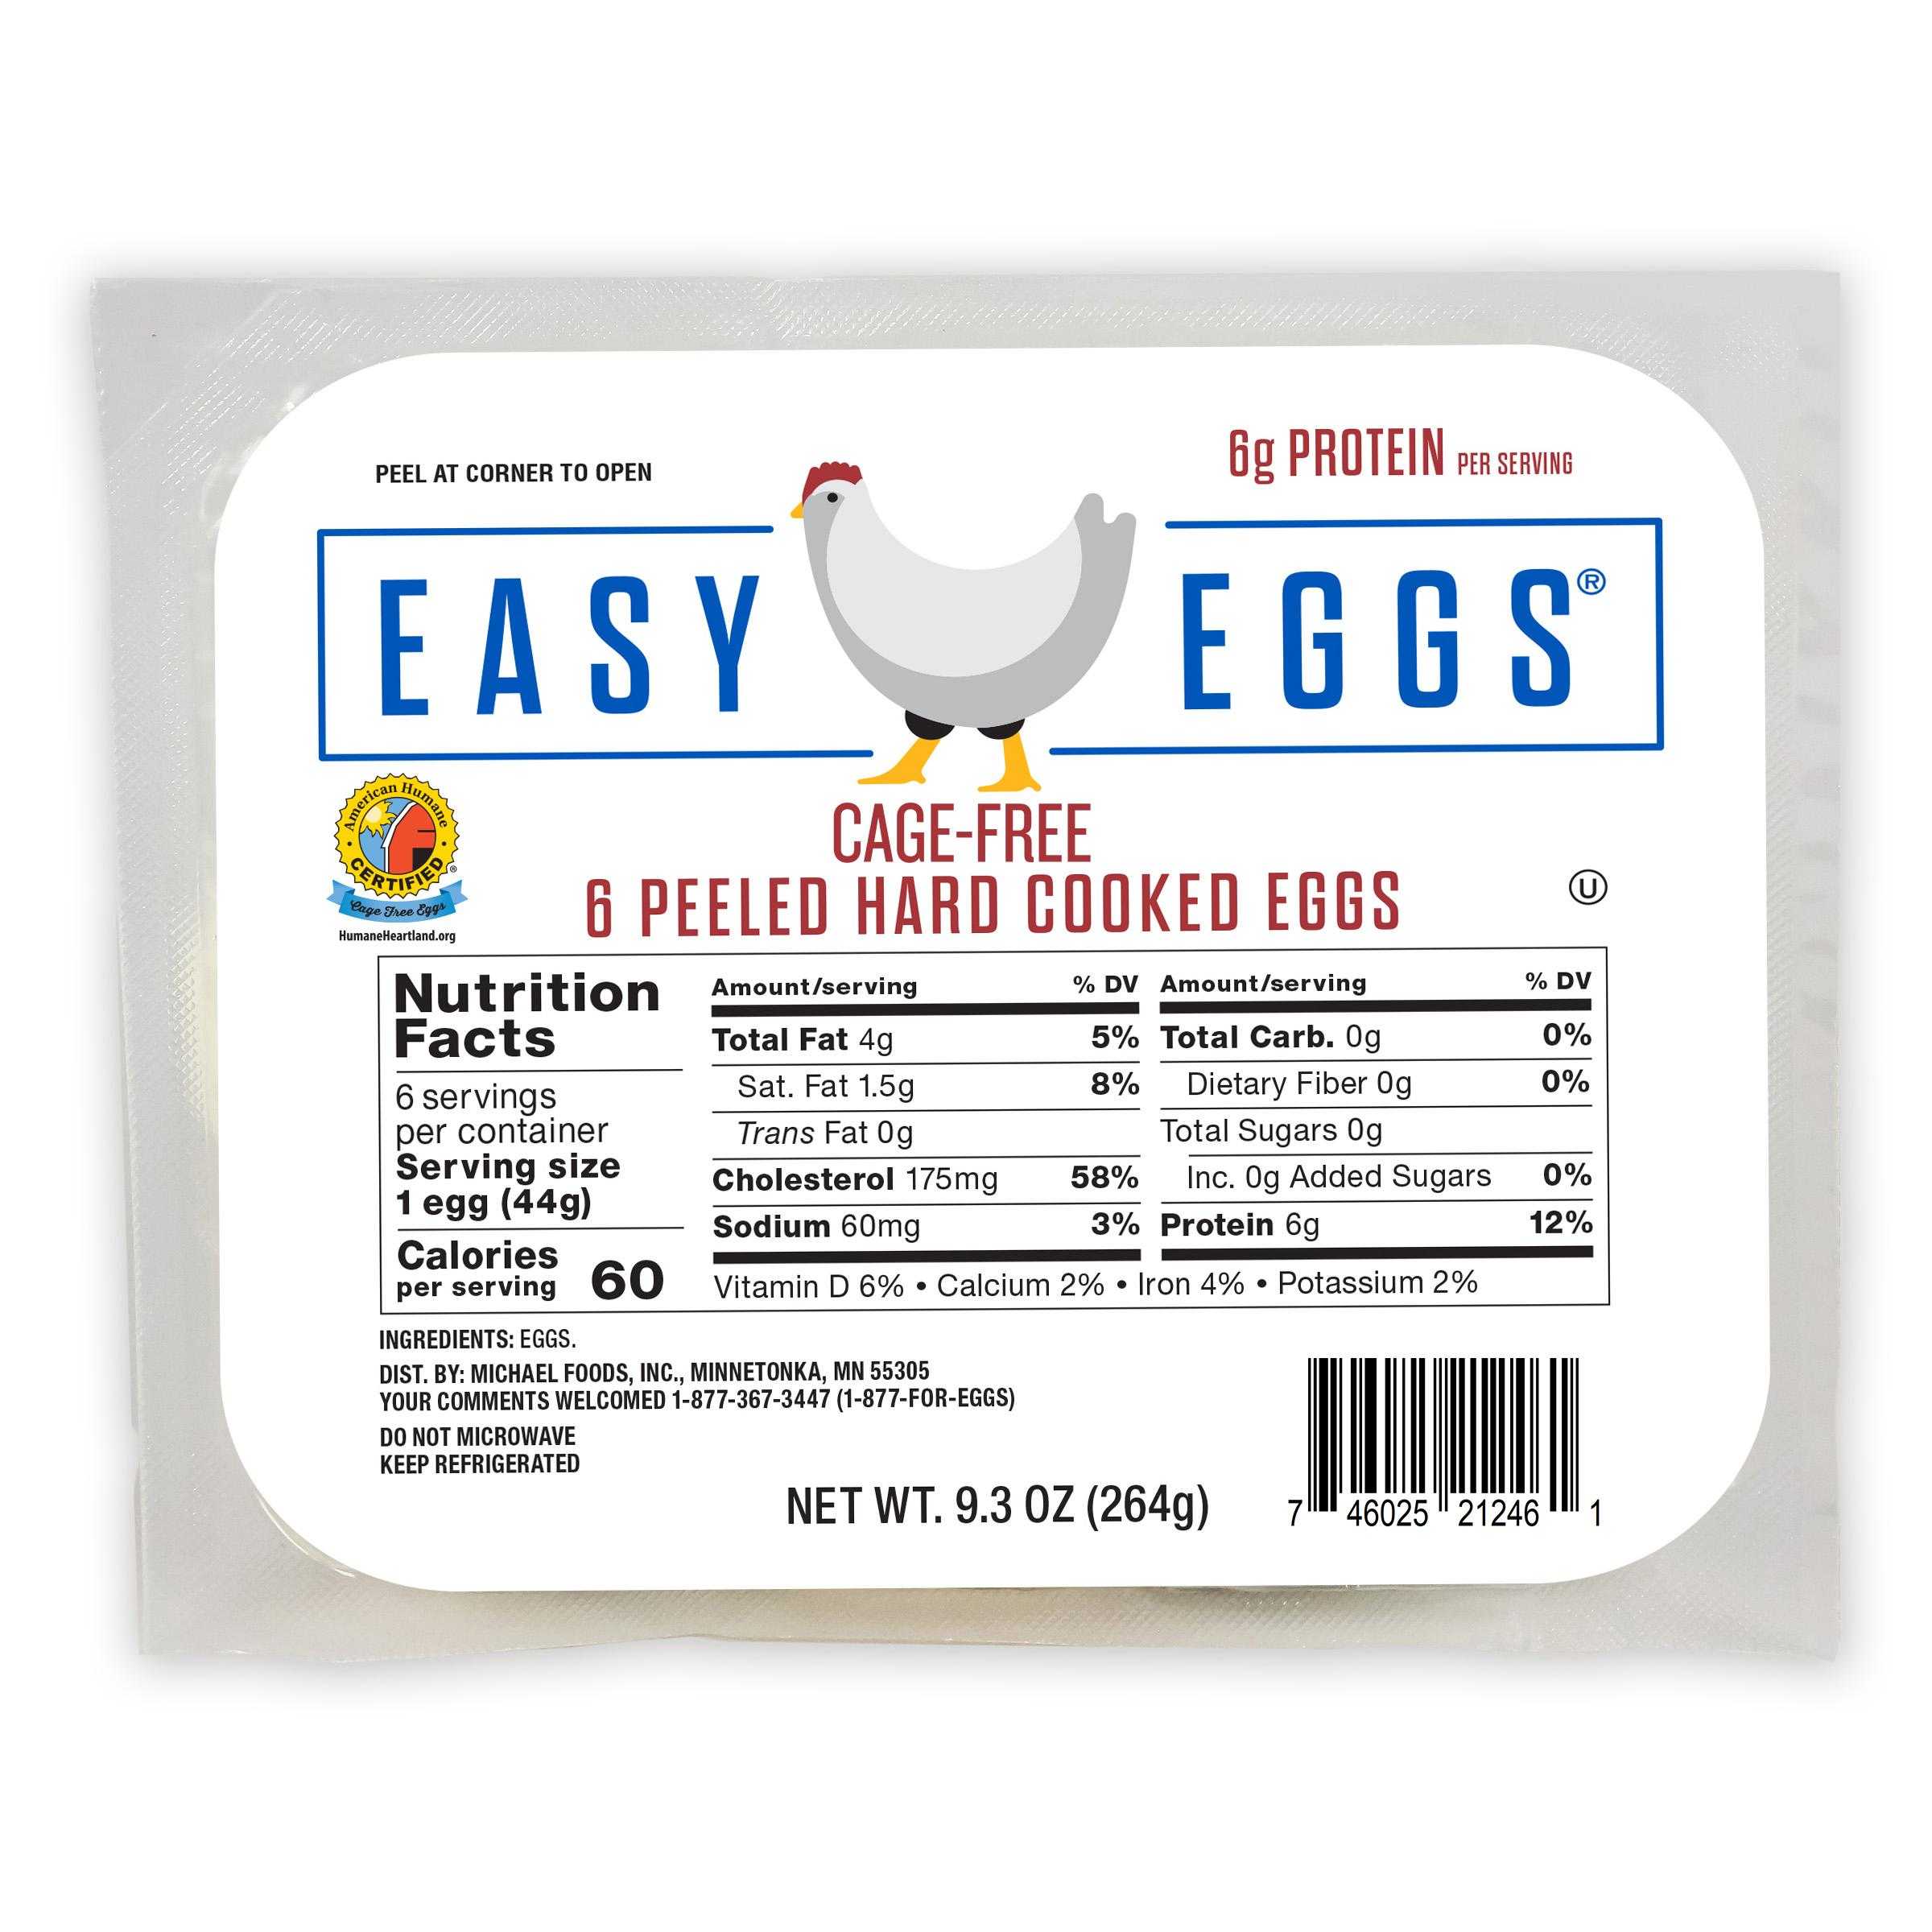 Easy Eggs® American Humane Certified Cage Free Peeled Hard Cooked Eggs, 24/6 Count Retail Ready Dry Pack